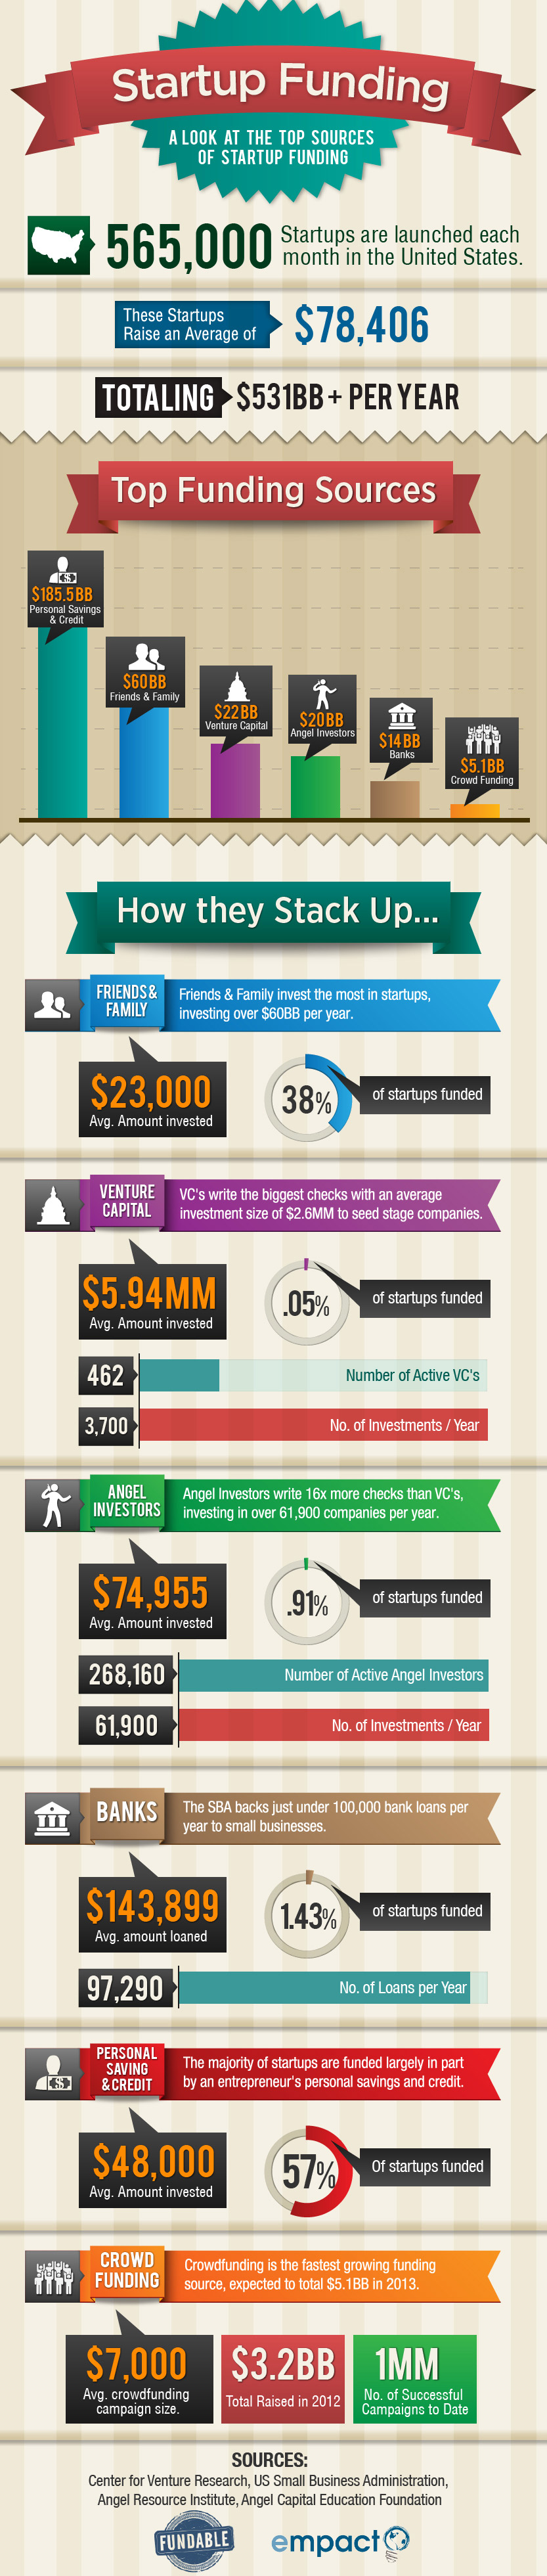 where-startup-funding-really-comes-from-infographic